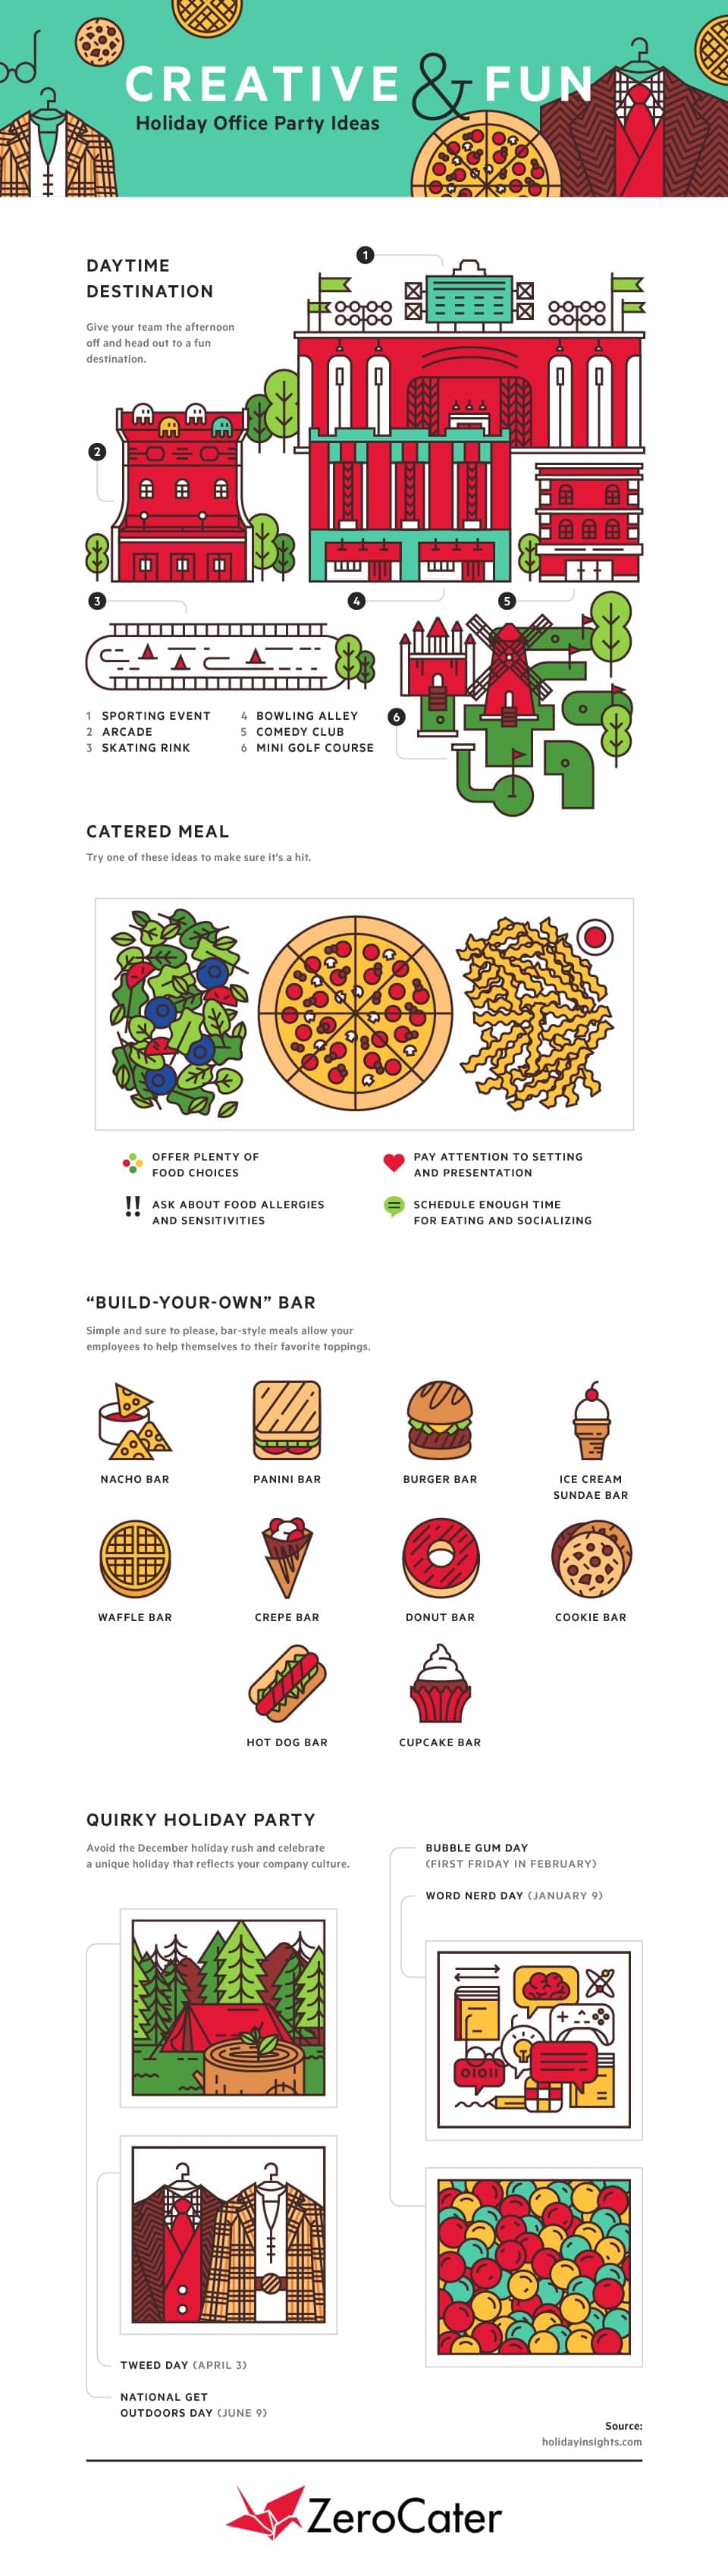 Creative Holiday Party Ideas InfoGraphics